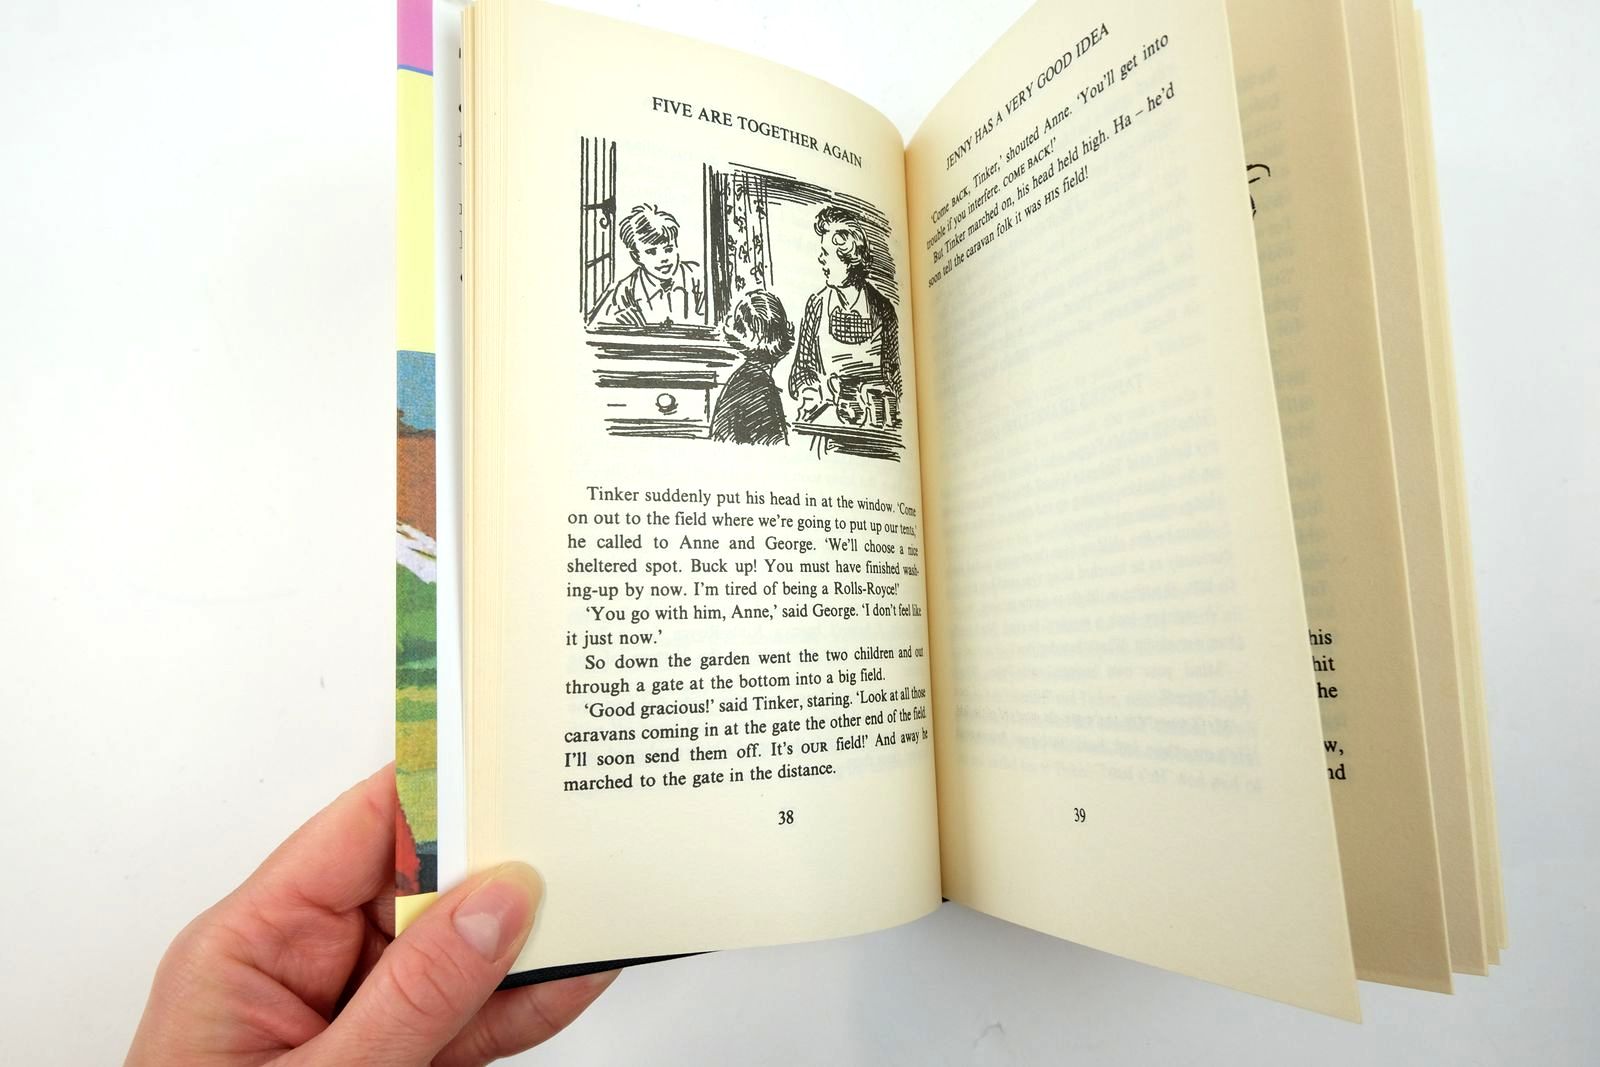 Photo of THE FAMOUS FIVE (21 VOLUME SET) written by Blyton, Enid illustrated by Soper, Eileen published by Book Club Associates (STOCK CODE: 2139744)  for sale by Stella & Rose's Books